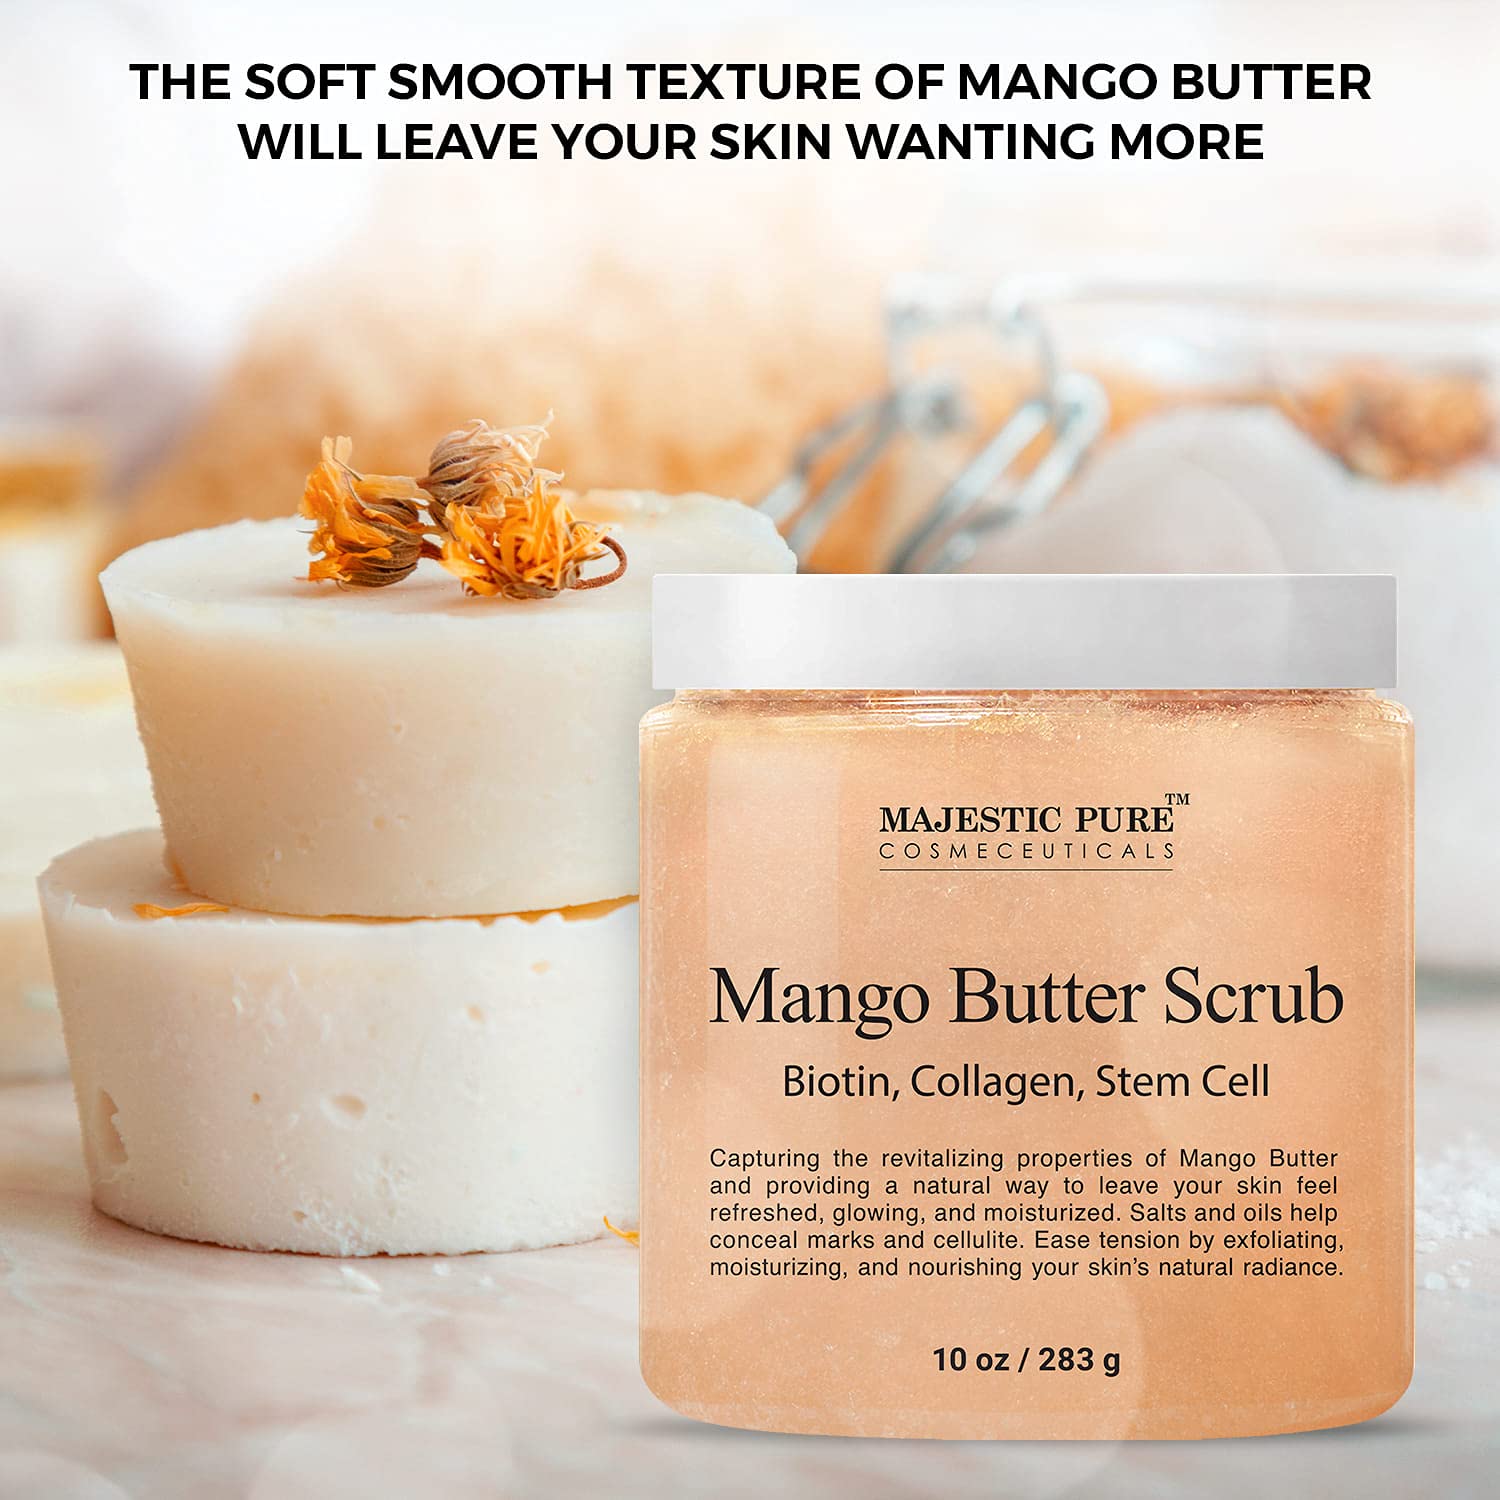 Majestic Pure Mango Butter Body Scrub - With Biotin, Collagen, Stem Cell - Exfoliating Salt Scrub to Exfoliate and Moisturize Skin - Deep Skin Cleanser - Natural Skin Care for Men and Women - 10 oz